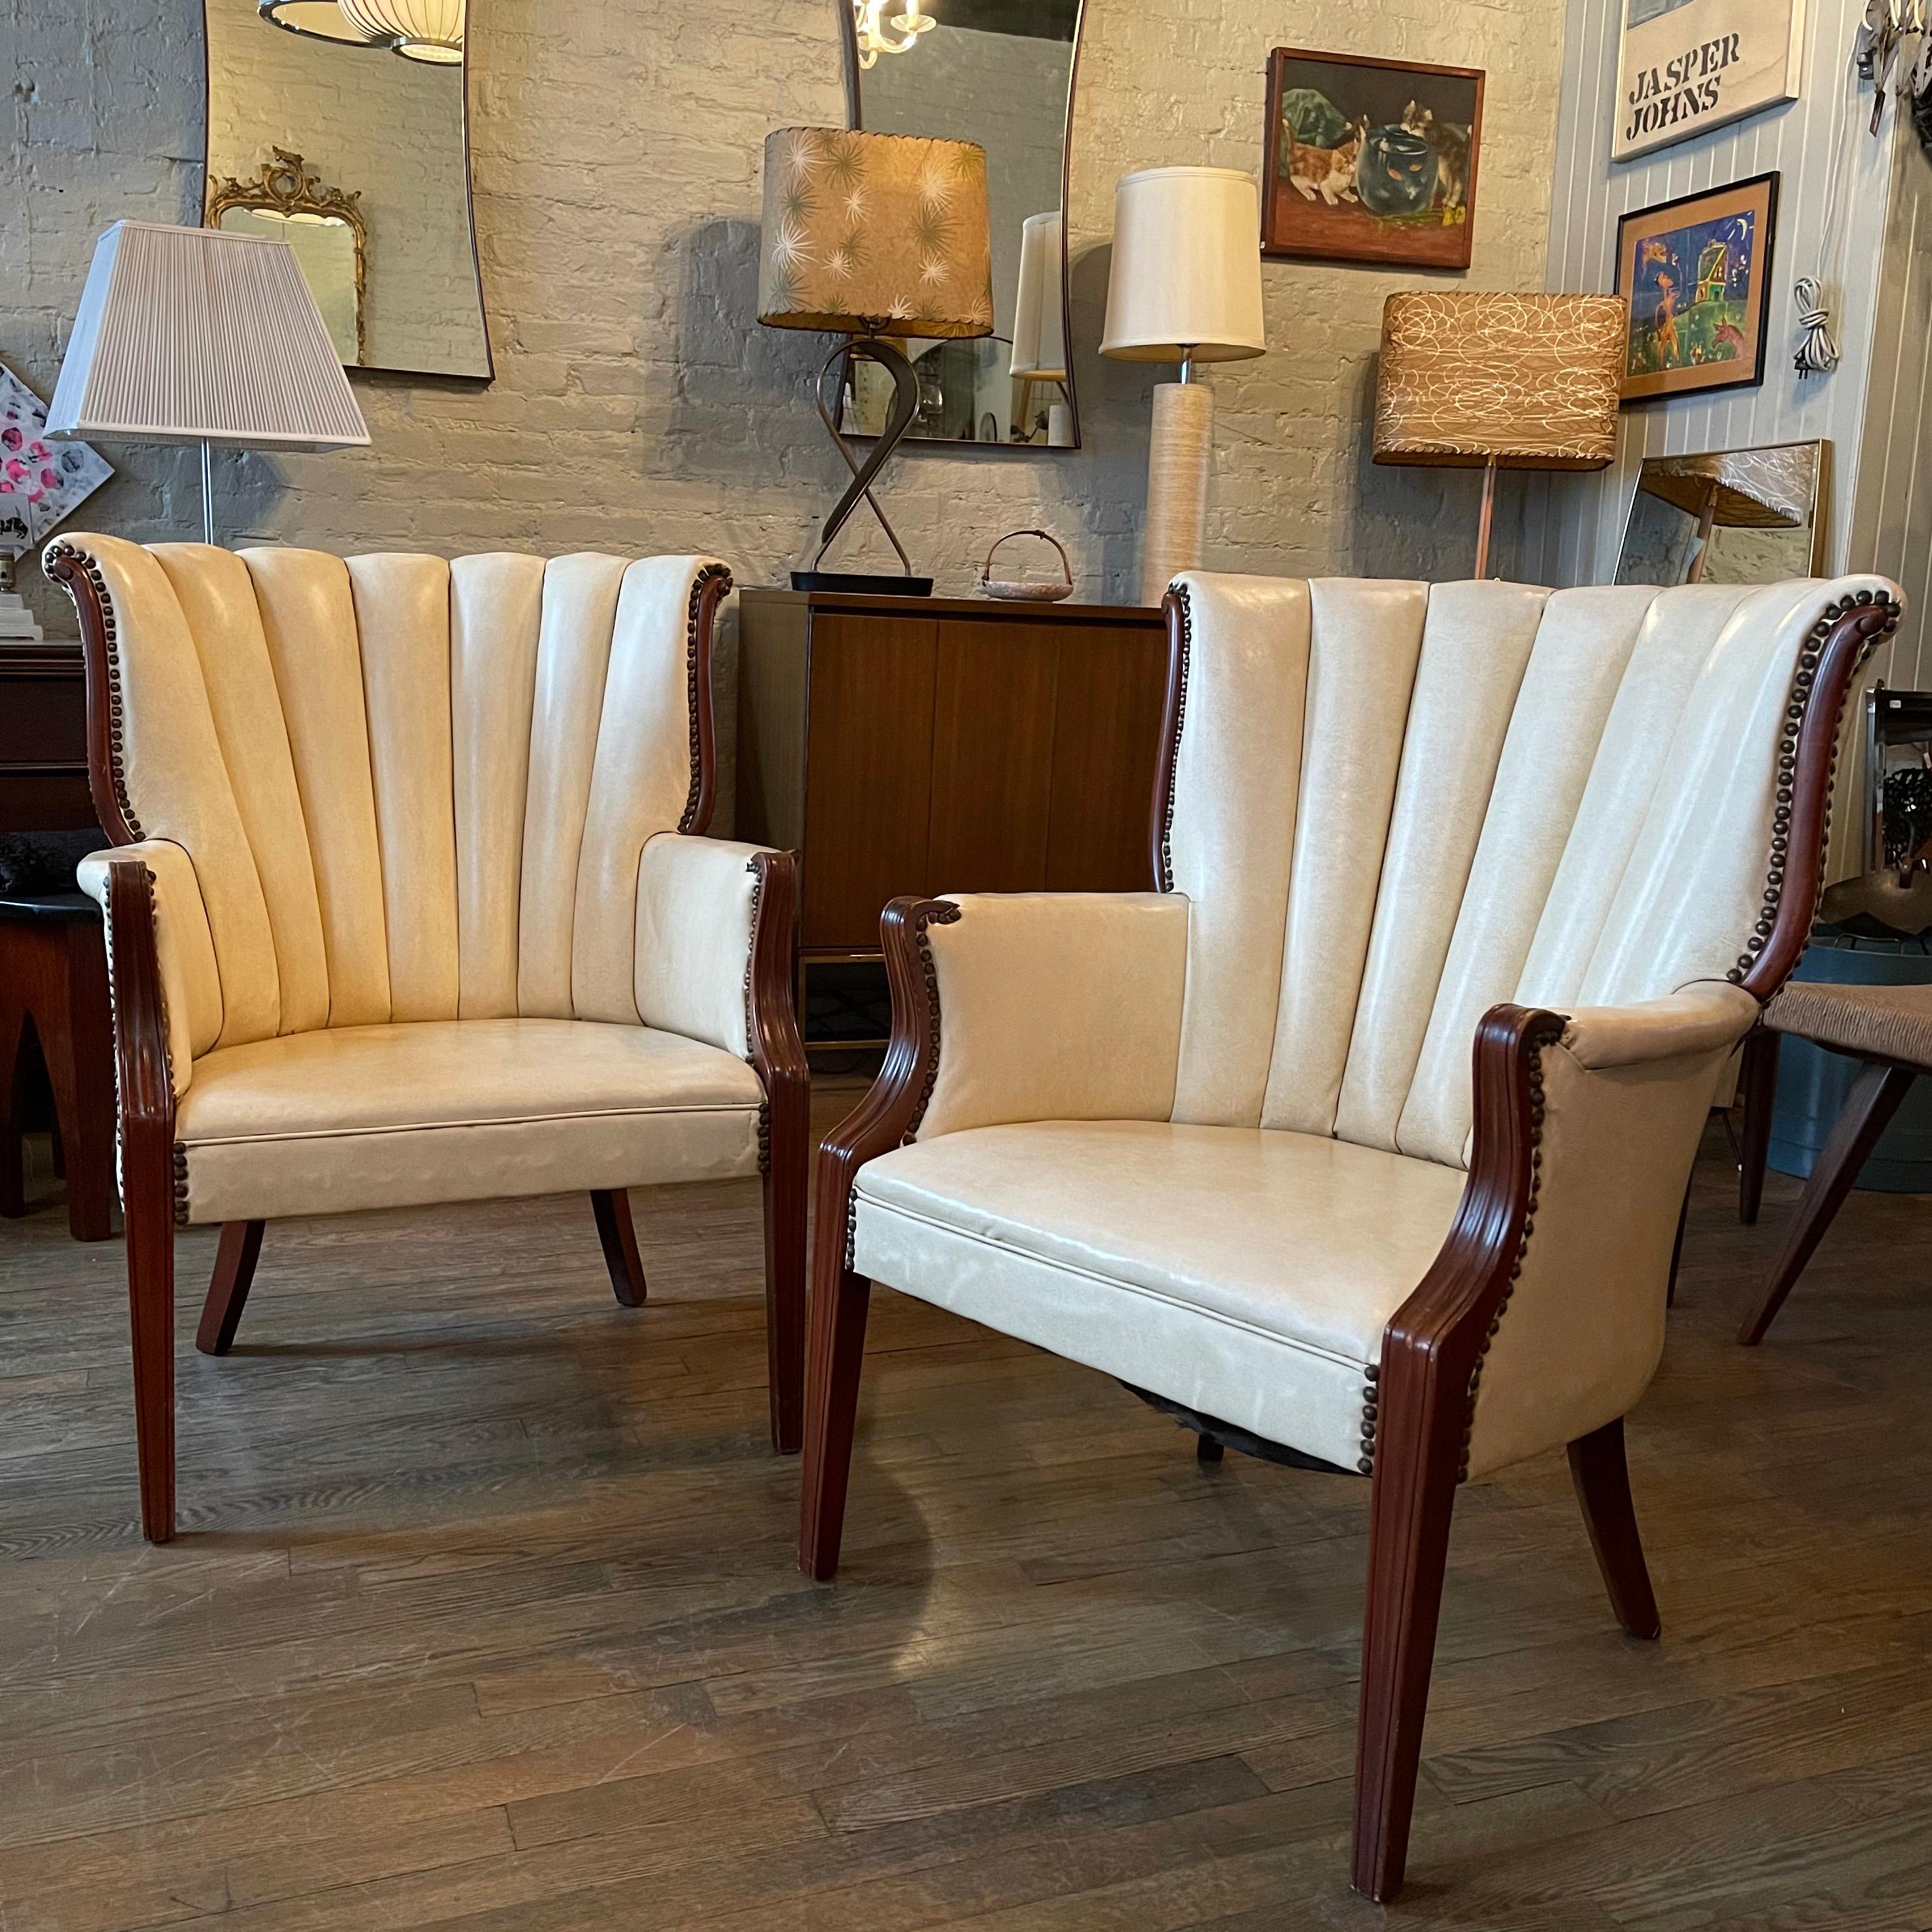 Pair of midcentury, Regency style, mahogany wingback armchairs feature cream vinyl upholstery with scalloped back and studded nailhead detail. The arm height is 23.5 inches.